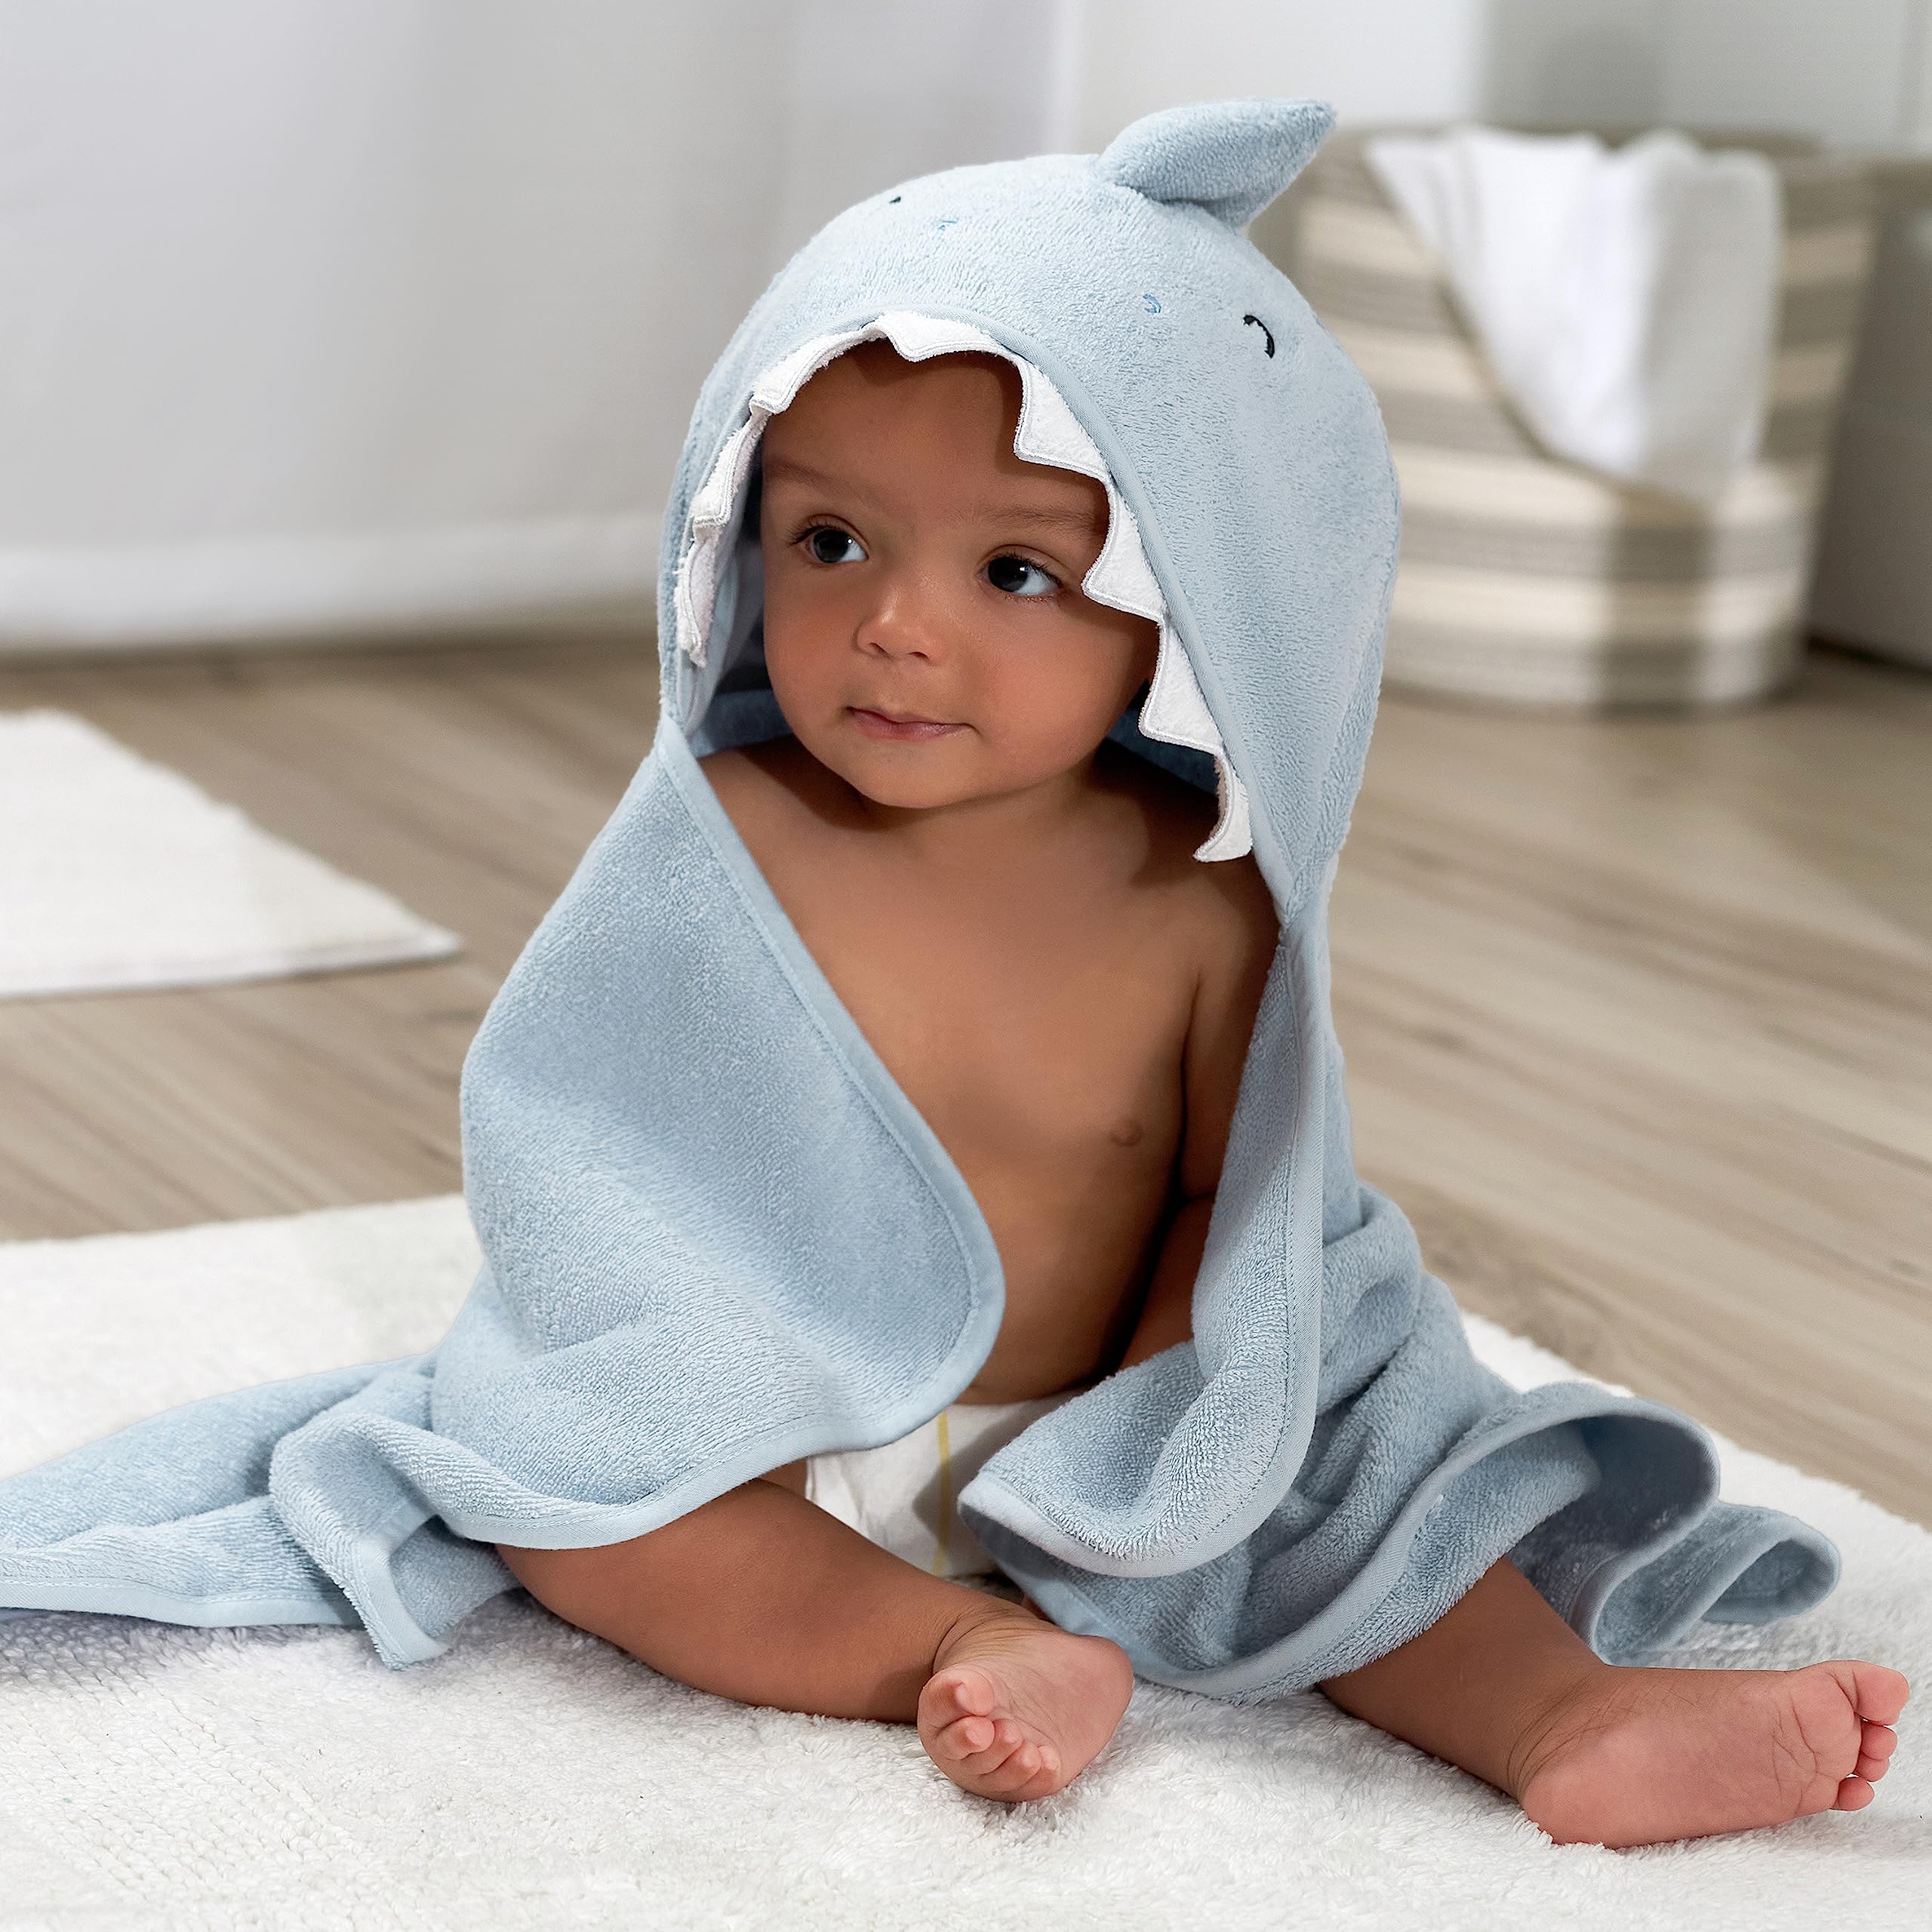 Gerber Baby 4 Piece Animal Character Hooded Towel and Washcloth Set, Blue Shark, One Size